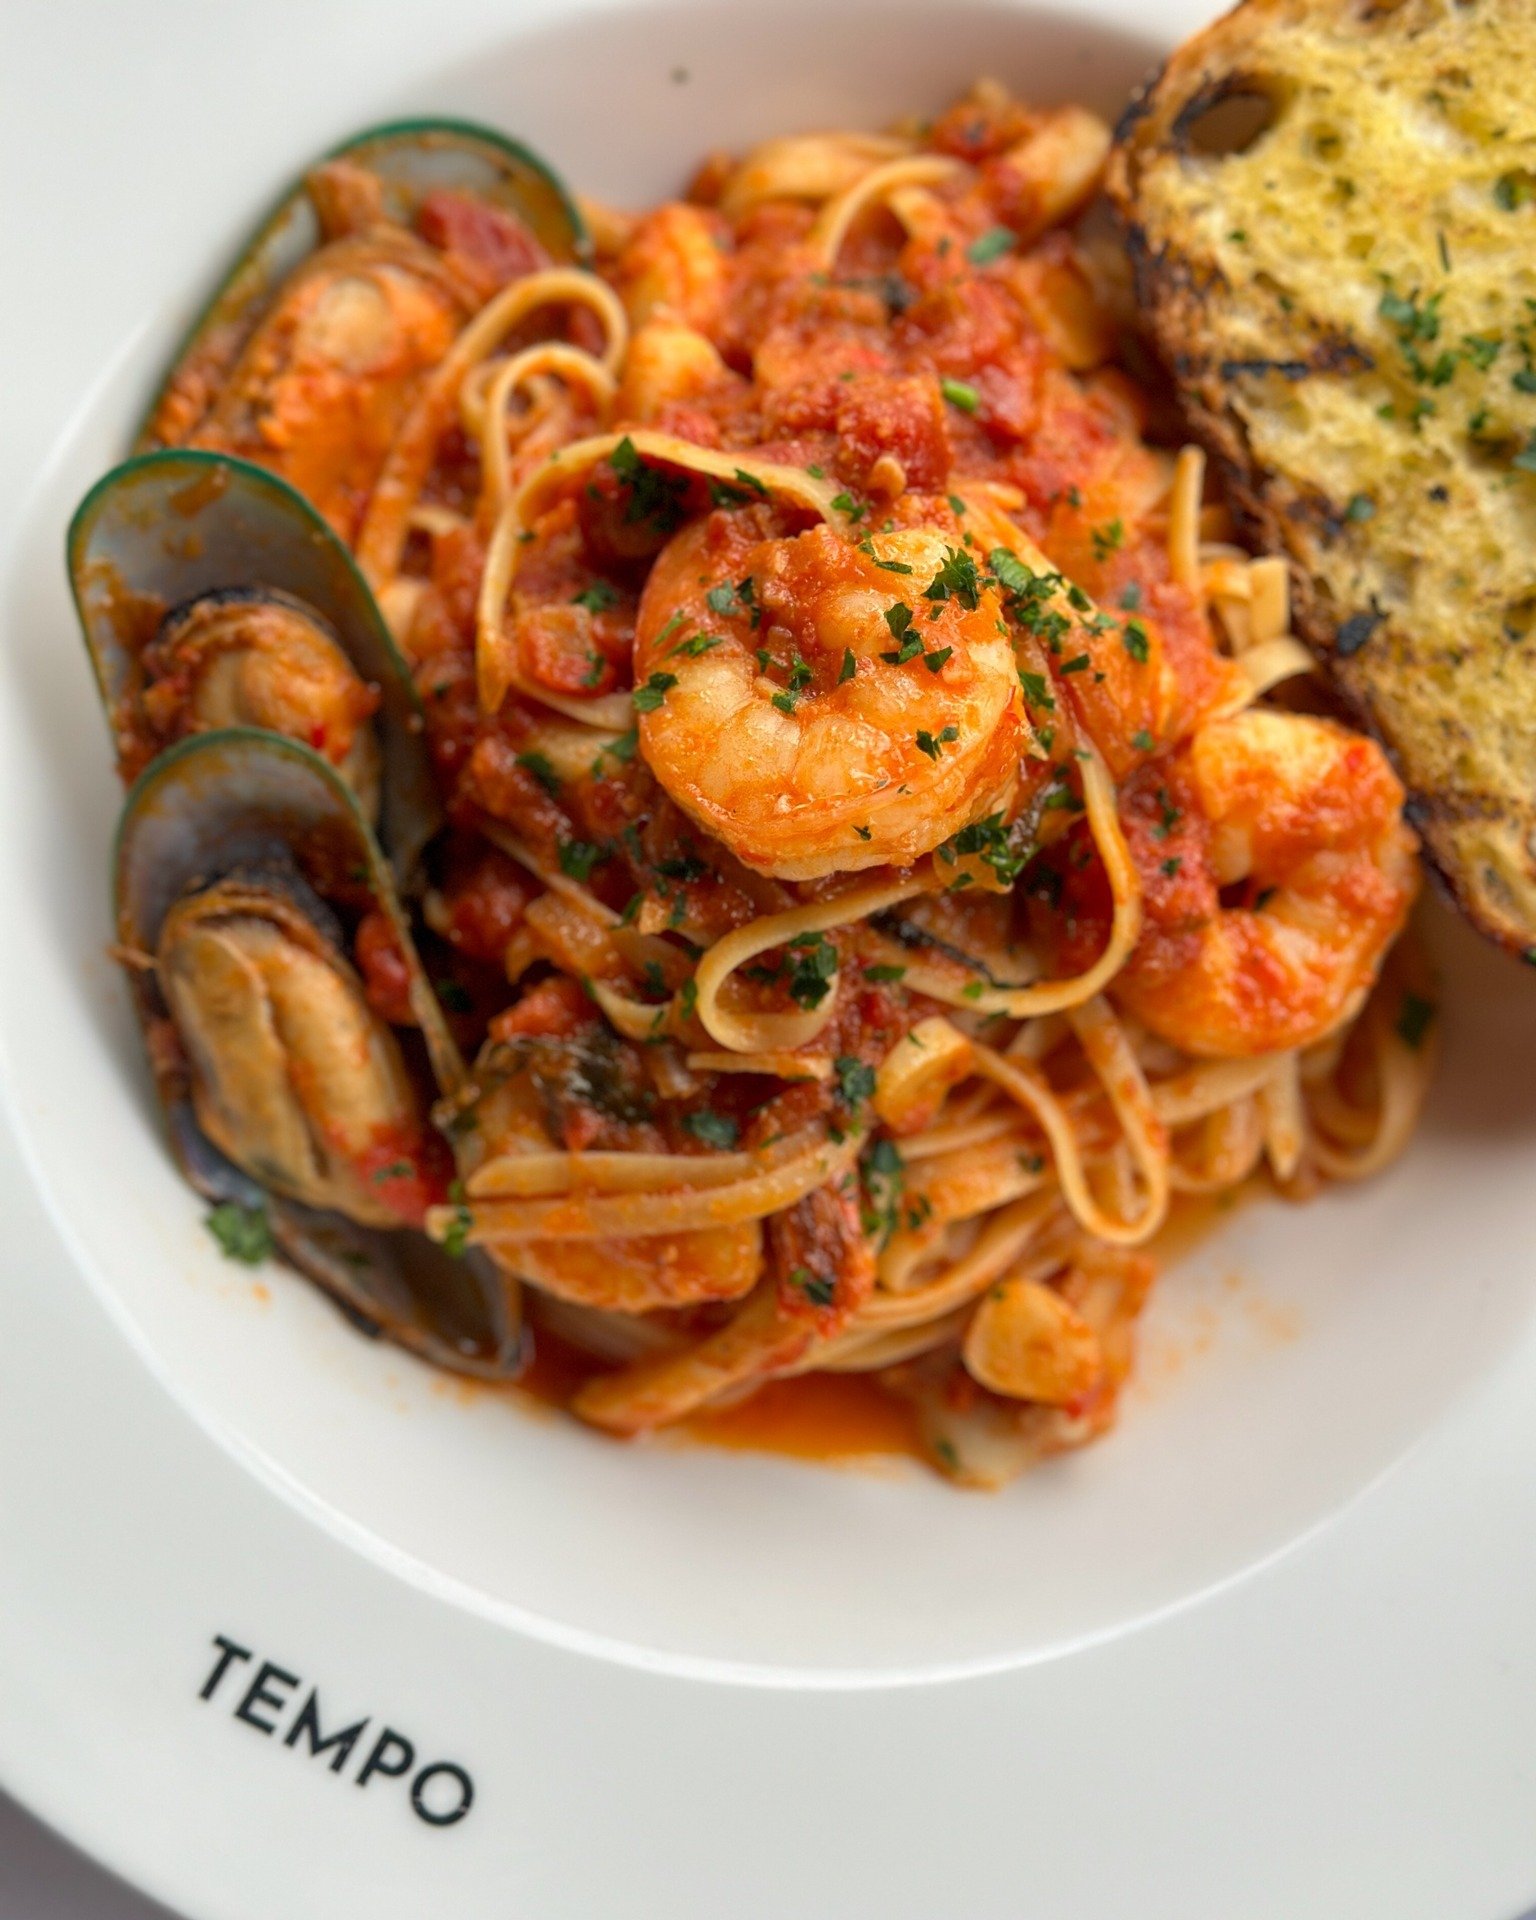 Indulge in the ultimate comfort meal for the chilly weather: a hearty seafood linguine brimming with your favourite ocean treasures, perfectly paired with a crispy slice of garlic bread.

To learn more about Tempo visit the link in bio.
_____

Open d